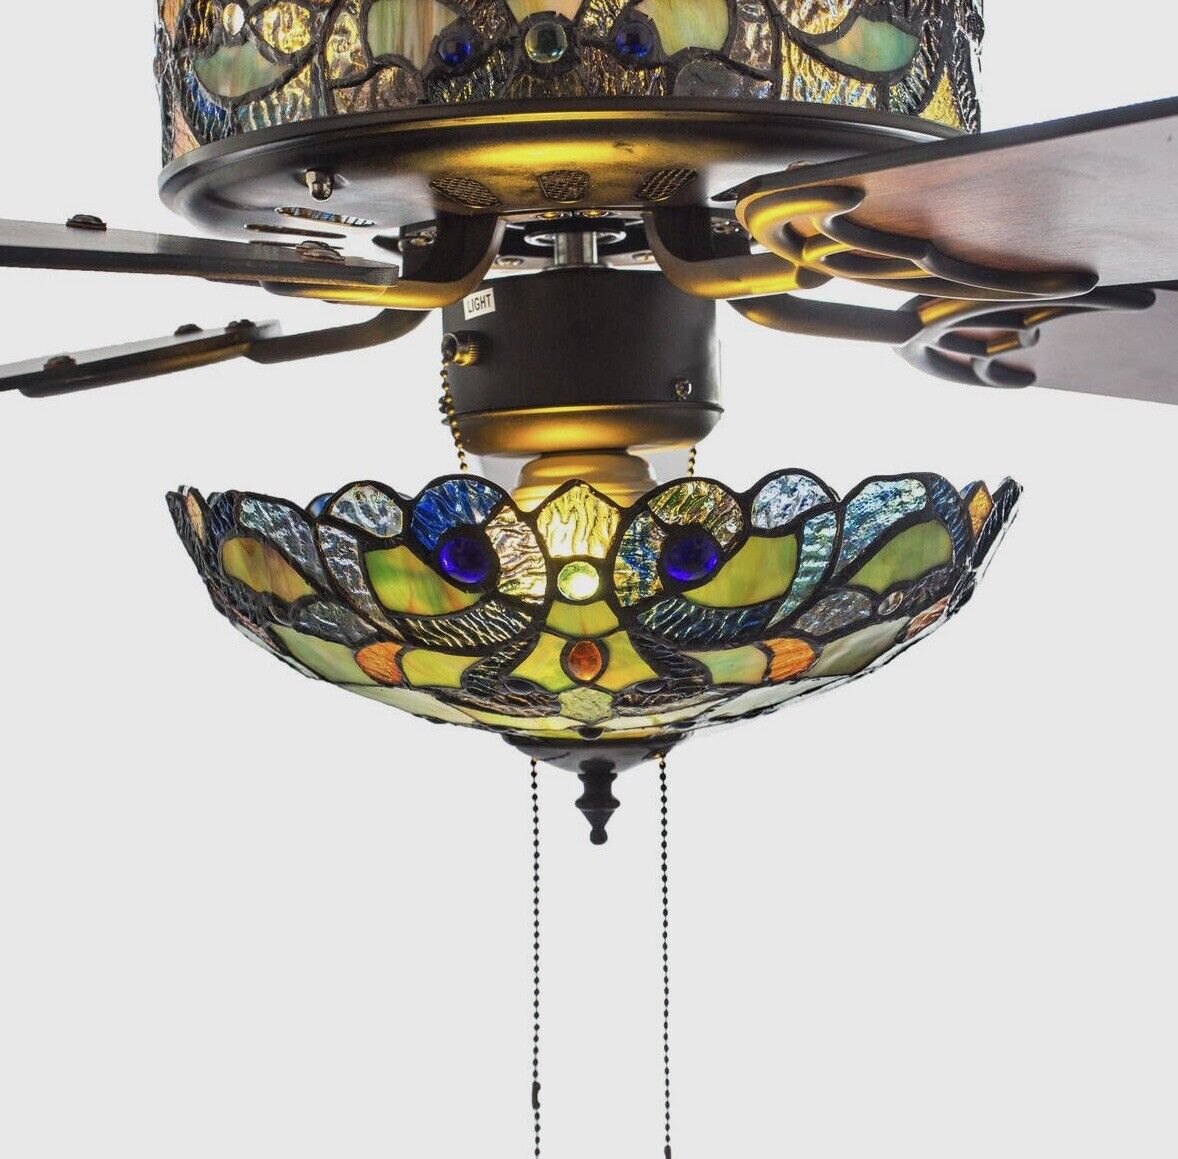 Tiffany themed Style ceiling fan teal and blue 52 inch